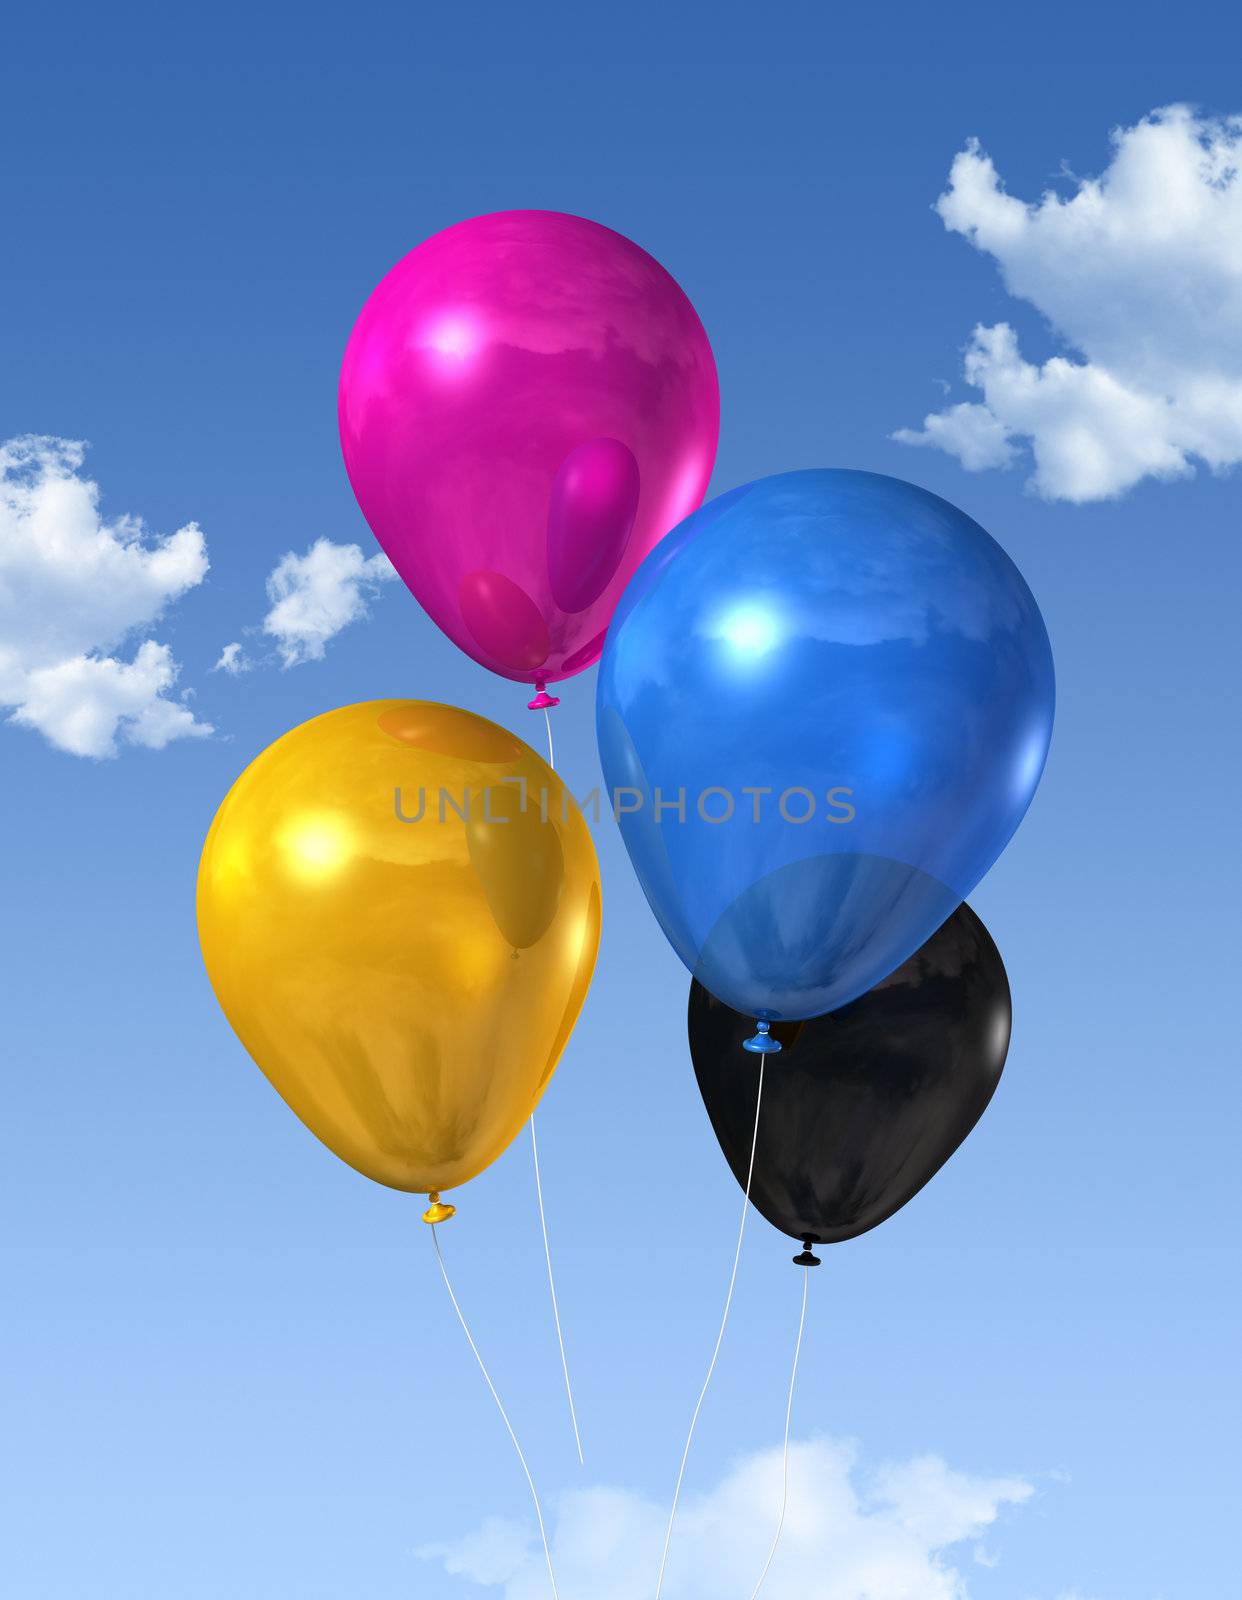 CMYK colored balloons on a blue sky by daboost